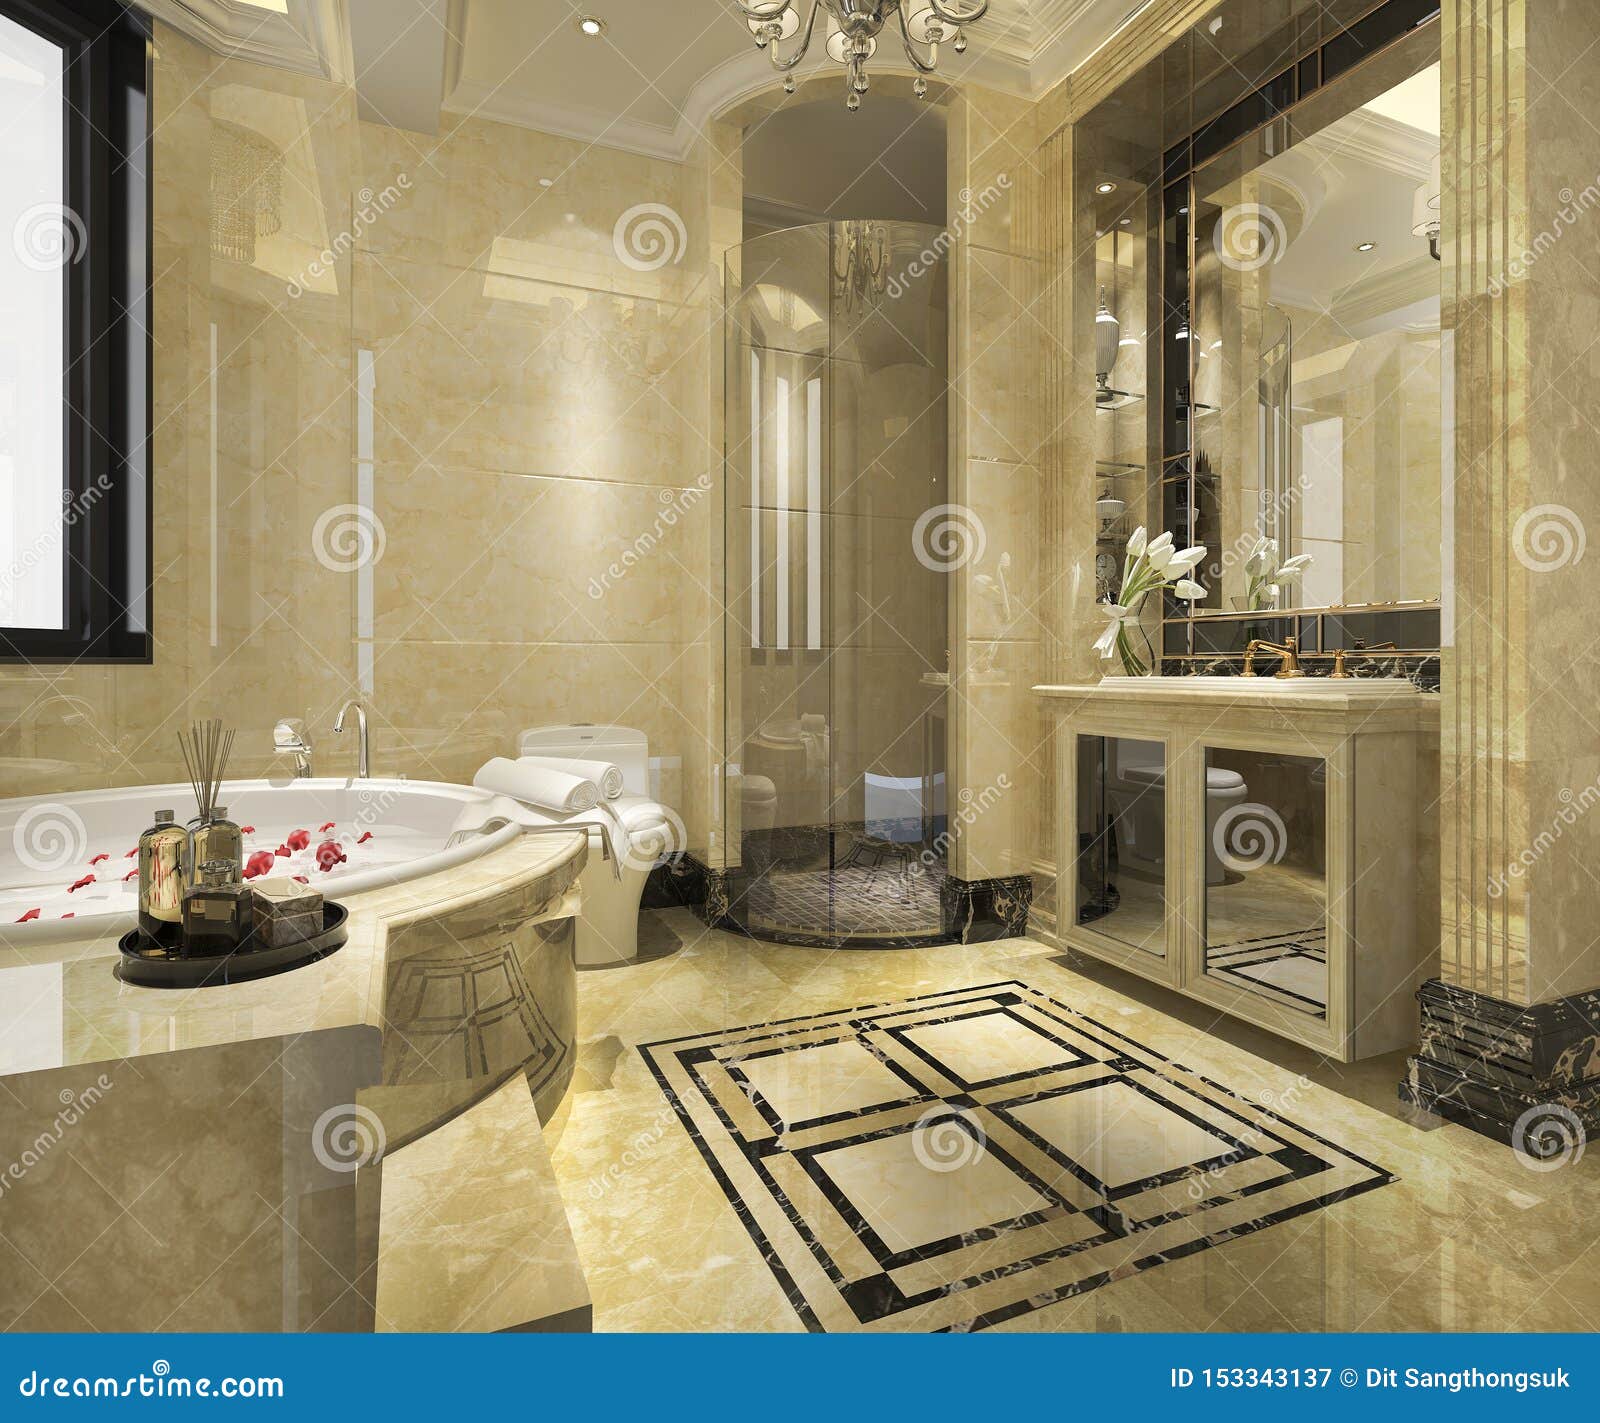 3d Rendering Modern Classic Bathroom With Luxury Tile Decor Stock